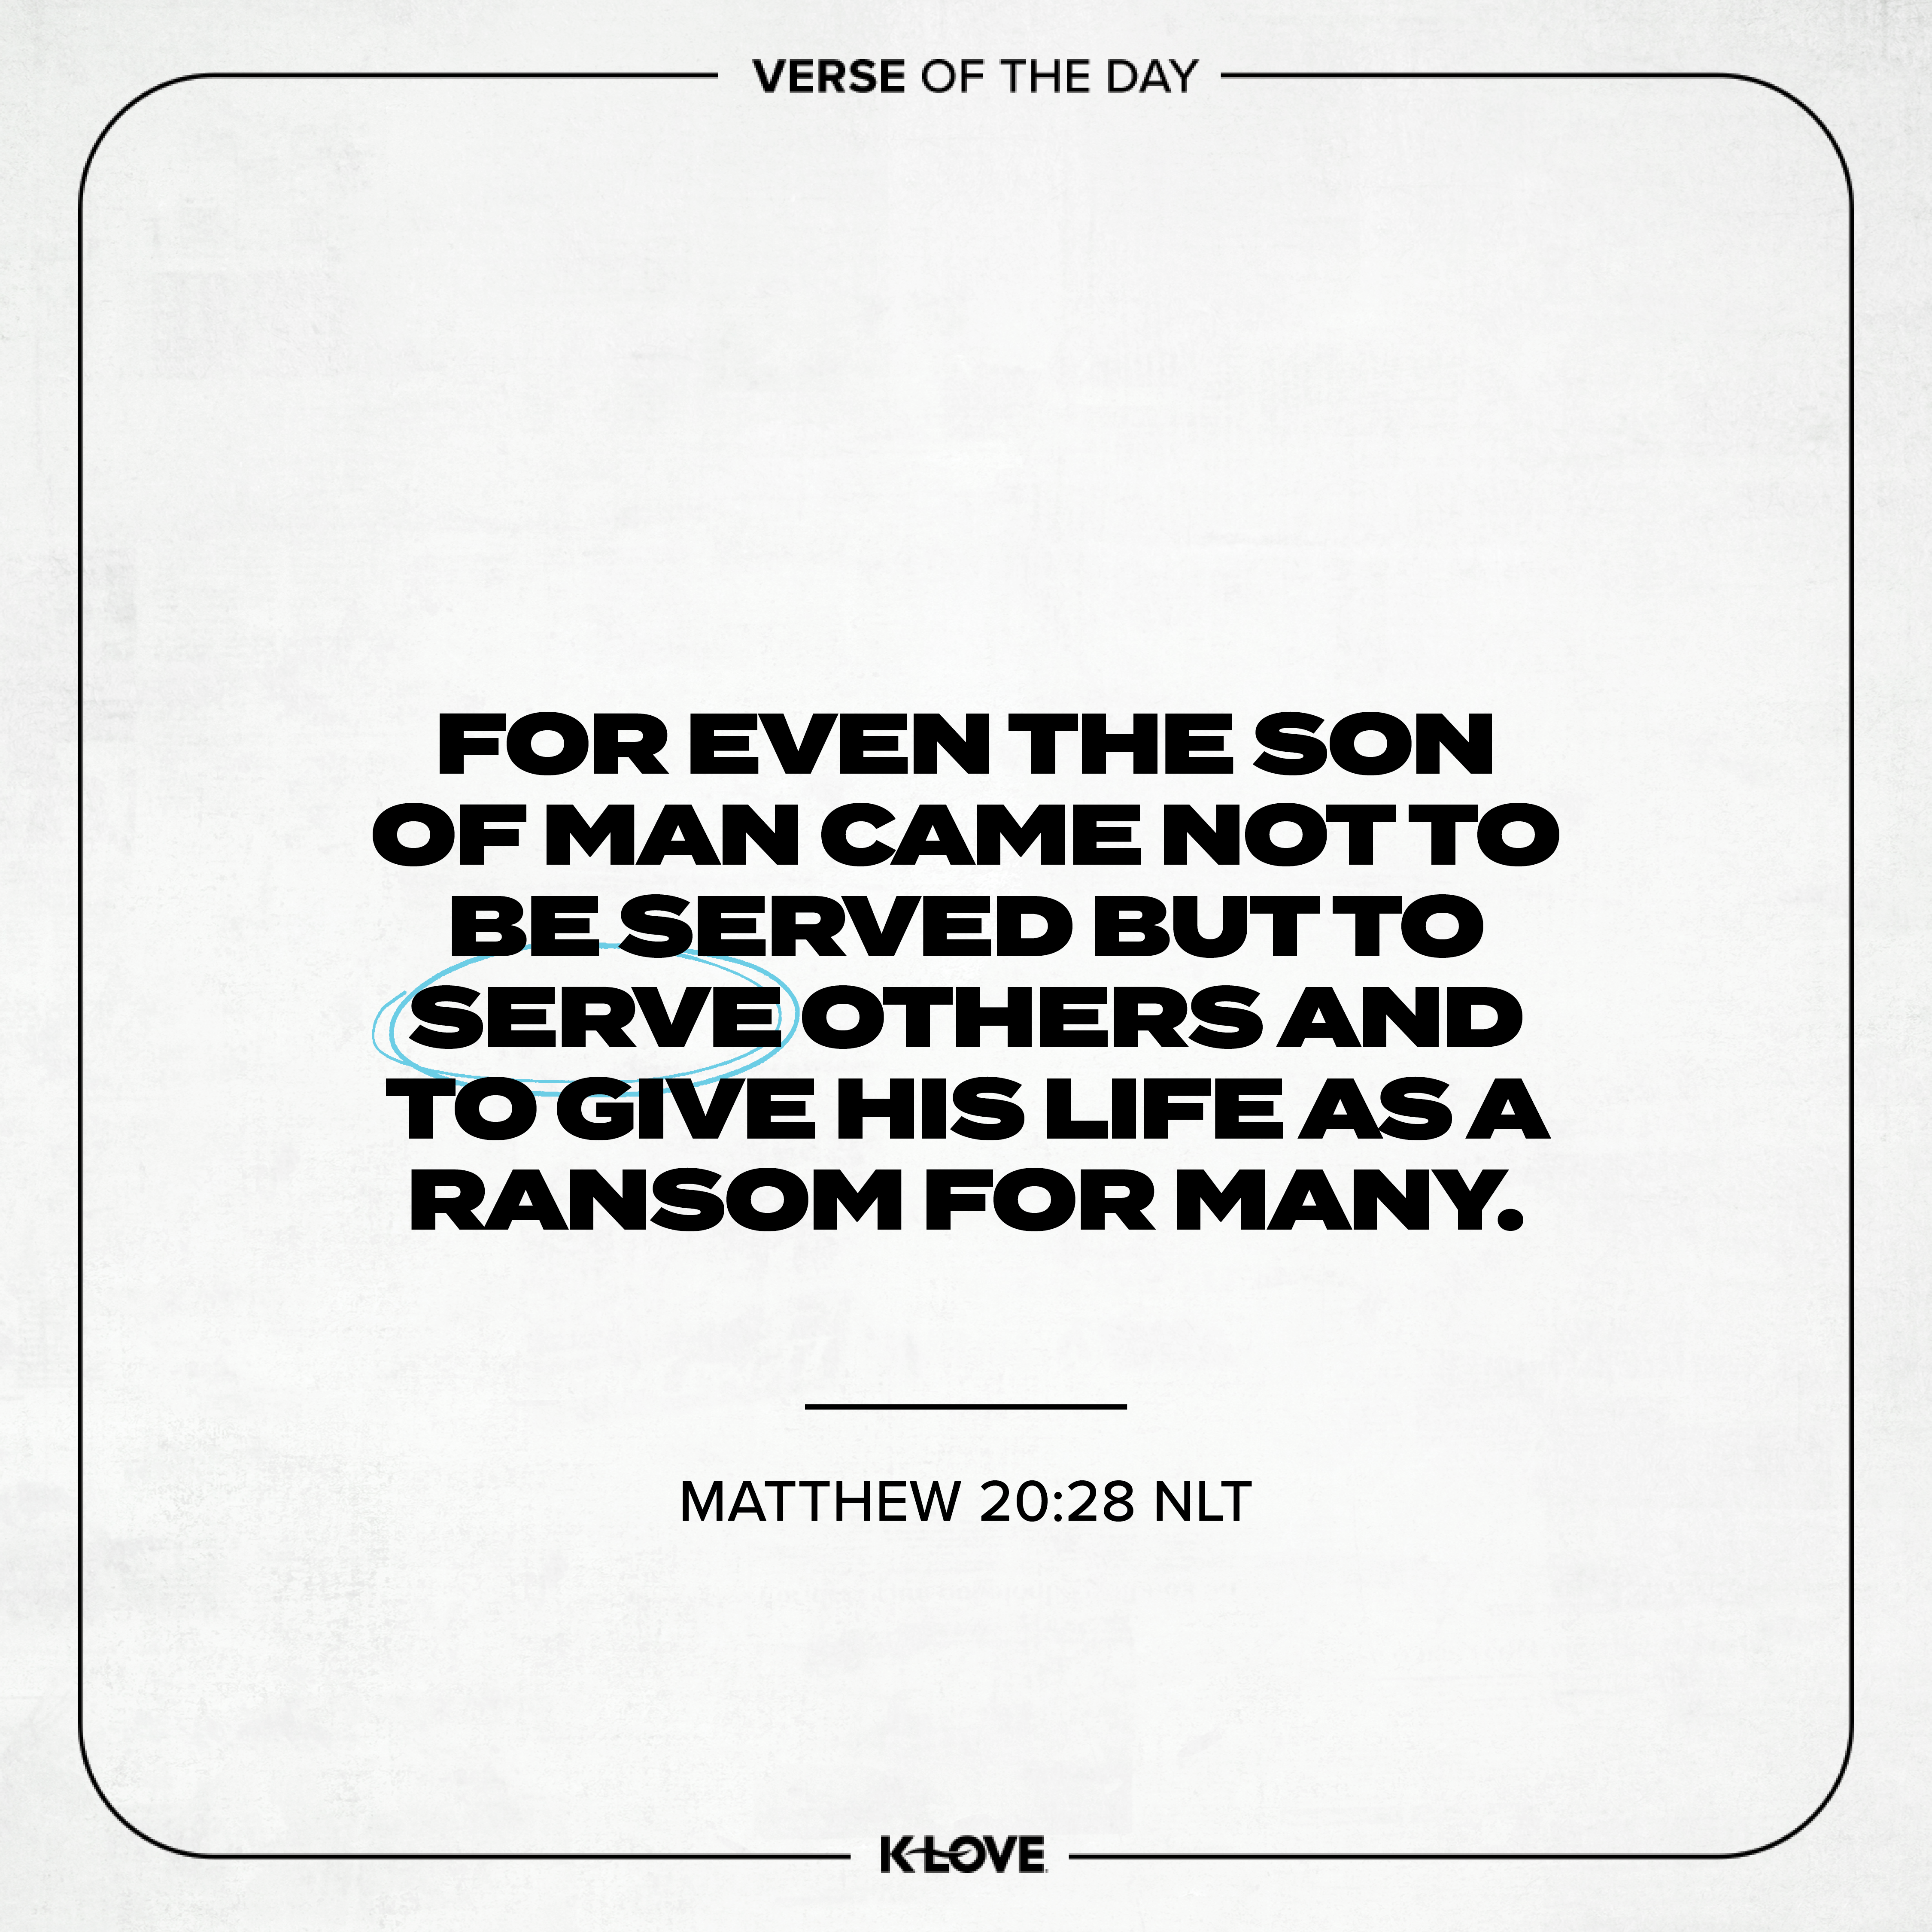 For even the Son of Man came not to be served but to serve others and to give His life as a ransom for many.